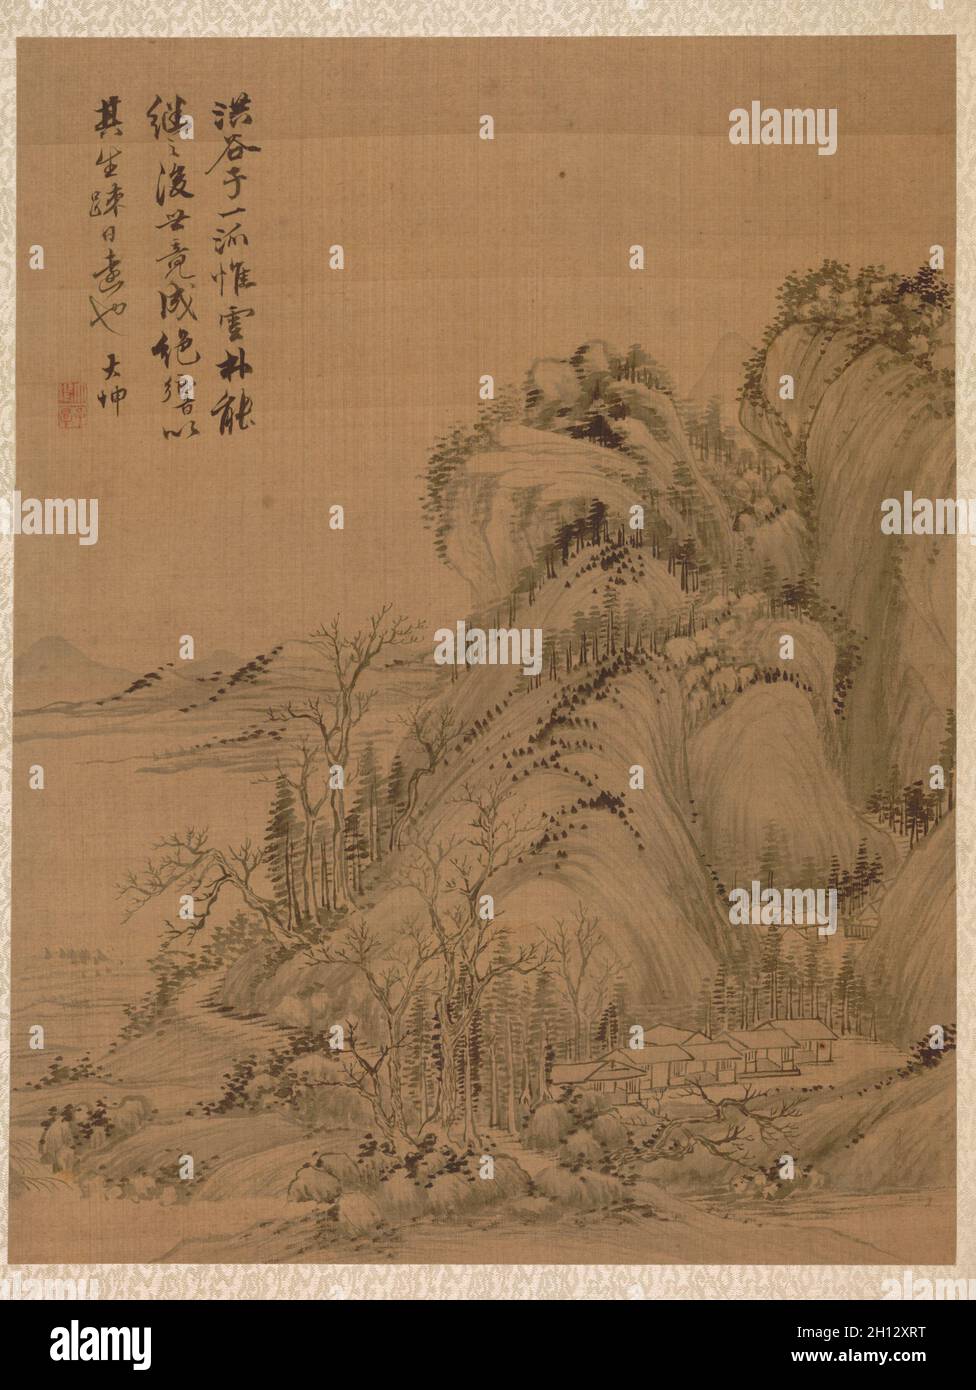 Landscape in the Style of Ching Hao, 1775. Zhai Dakun (Chinese, d. 1804). Album leaf: ink and color on silk; overall: 41.2 x 31.5 cm (16 1/4 x 12 3/8 in.). Stock Photo